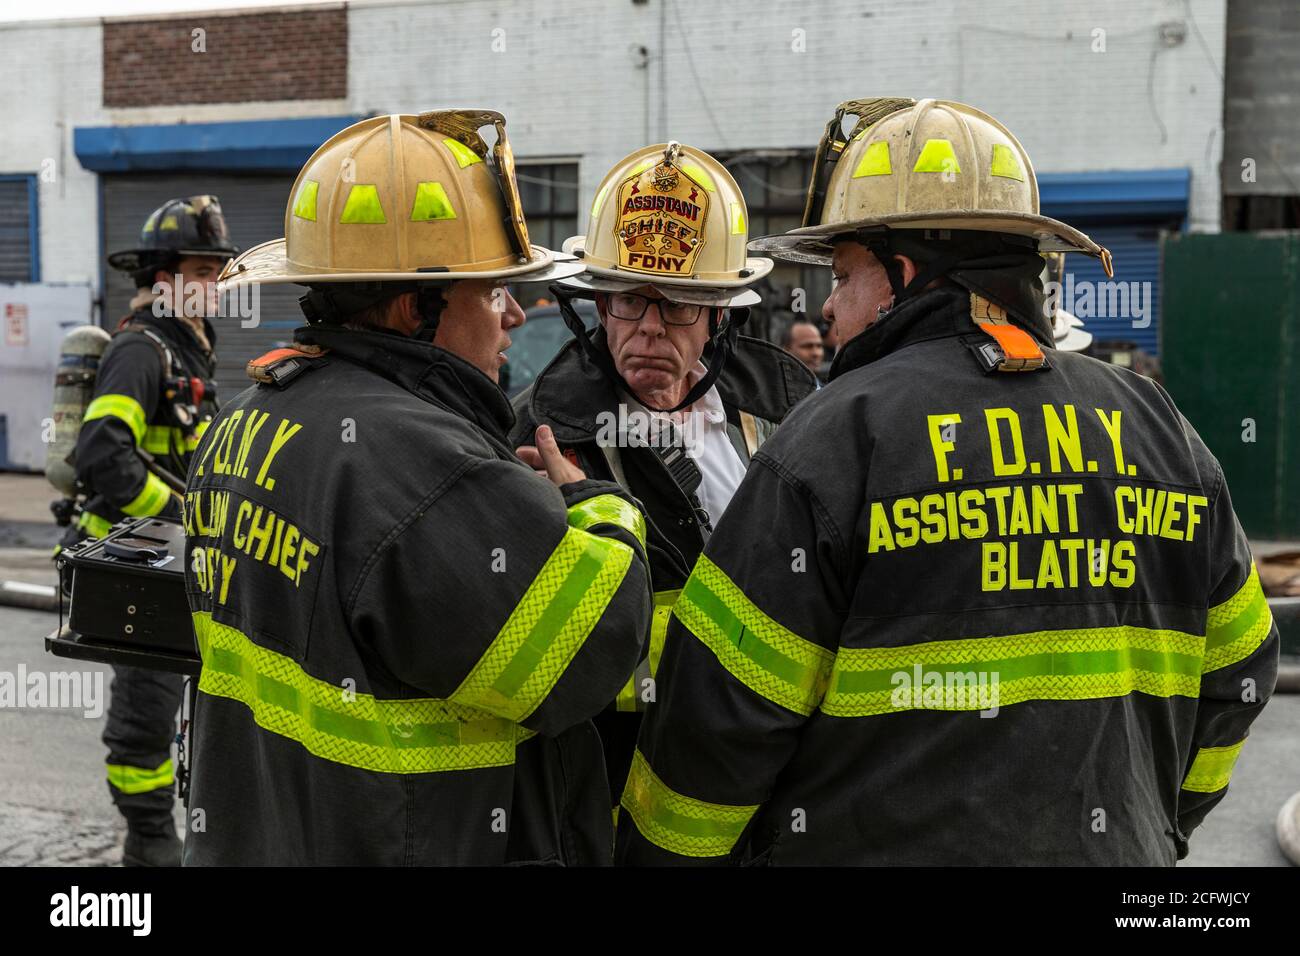 New York, NY - September 7, 2020: Assistant Chief Howy seen where firefighters battle massive salvage yard 4 alarm fire in the Bronx Hunts Point section Stock Photo